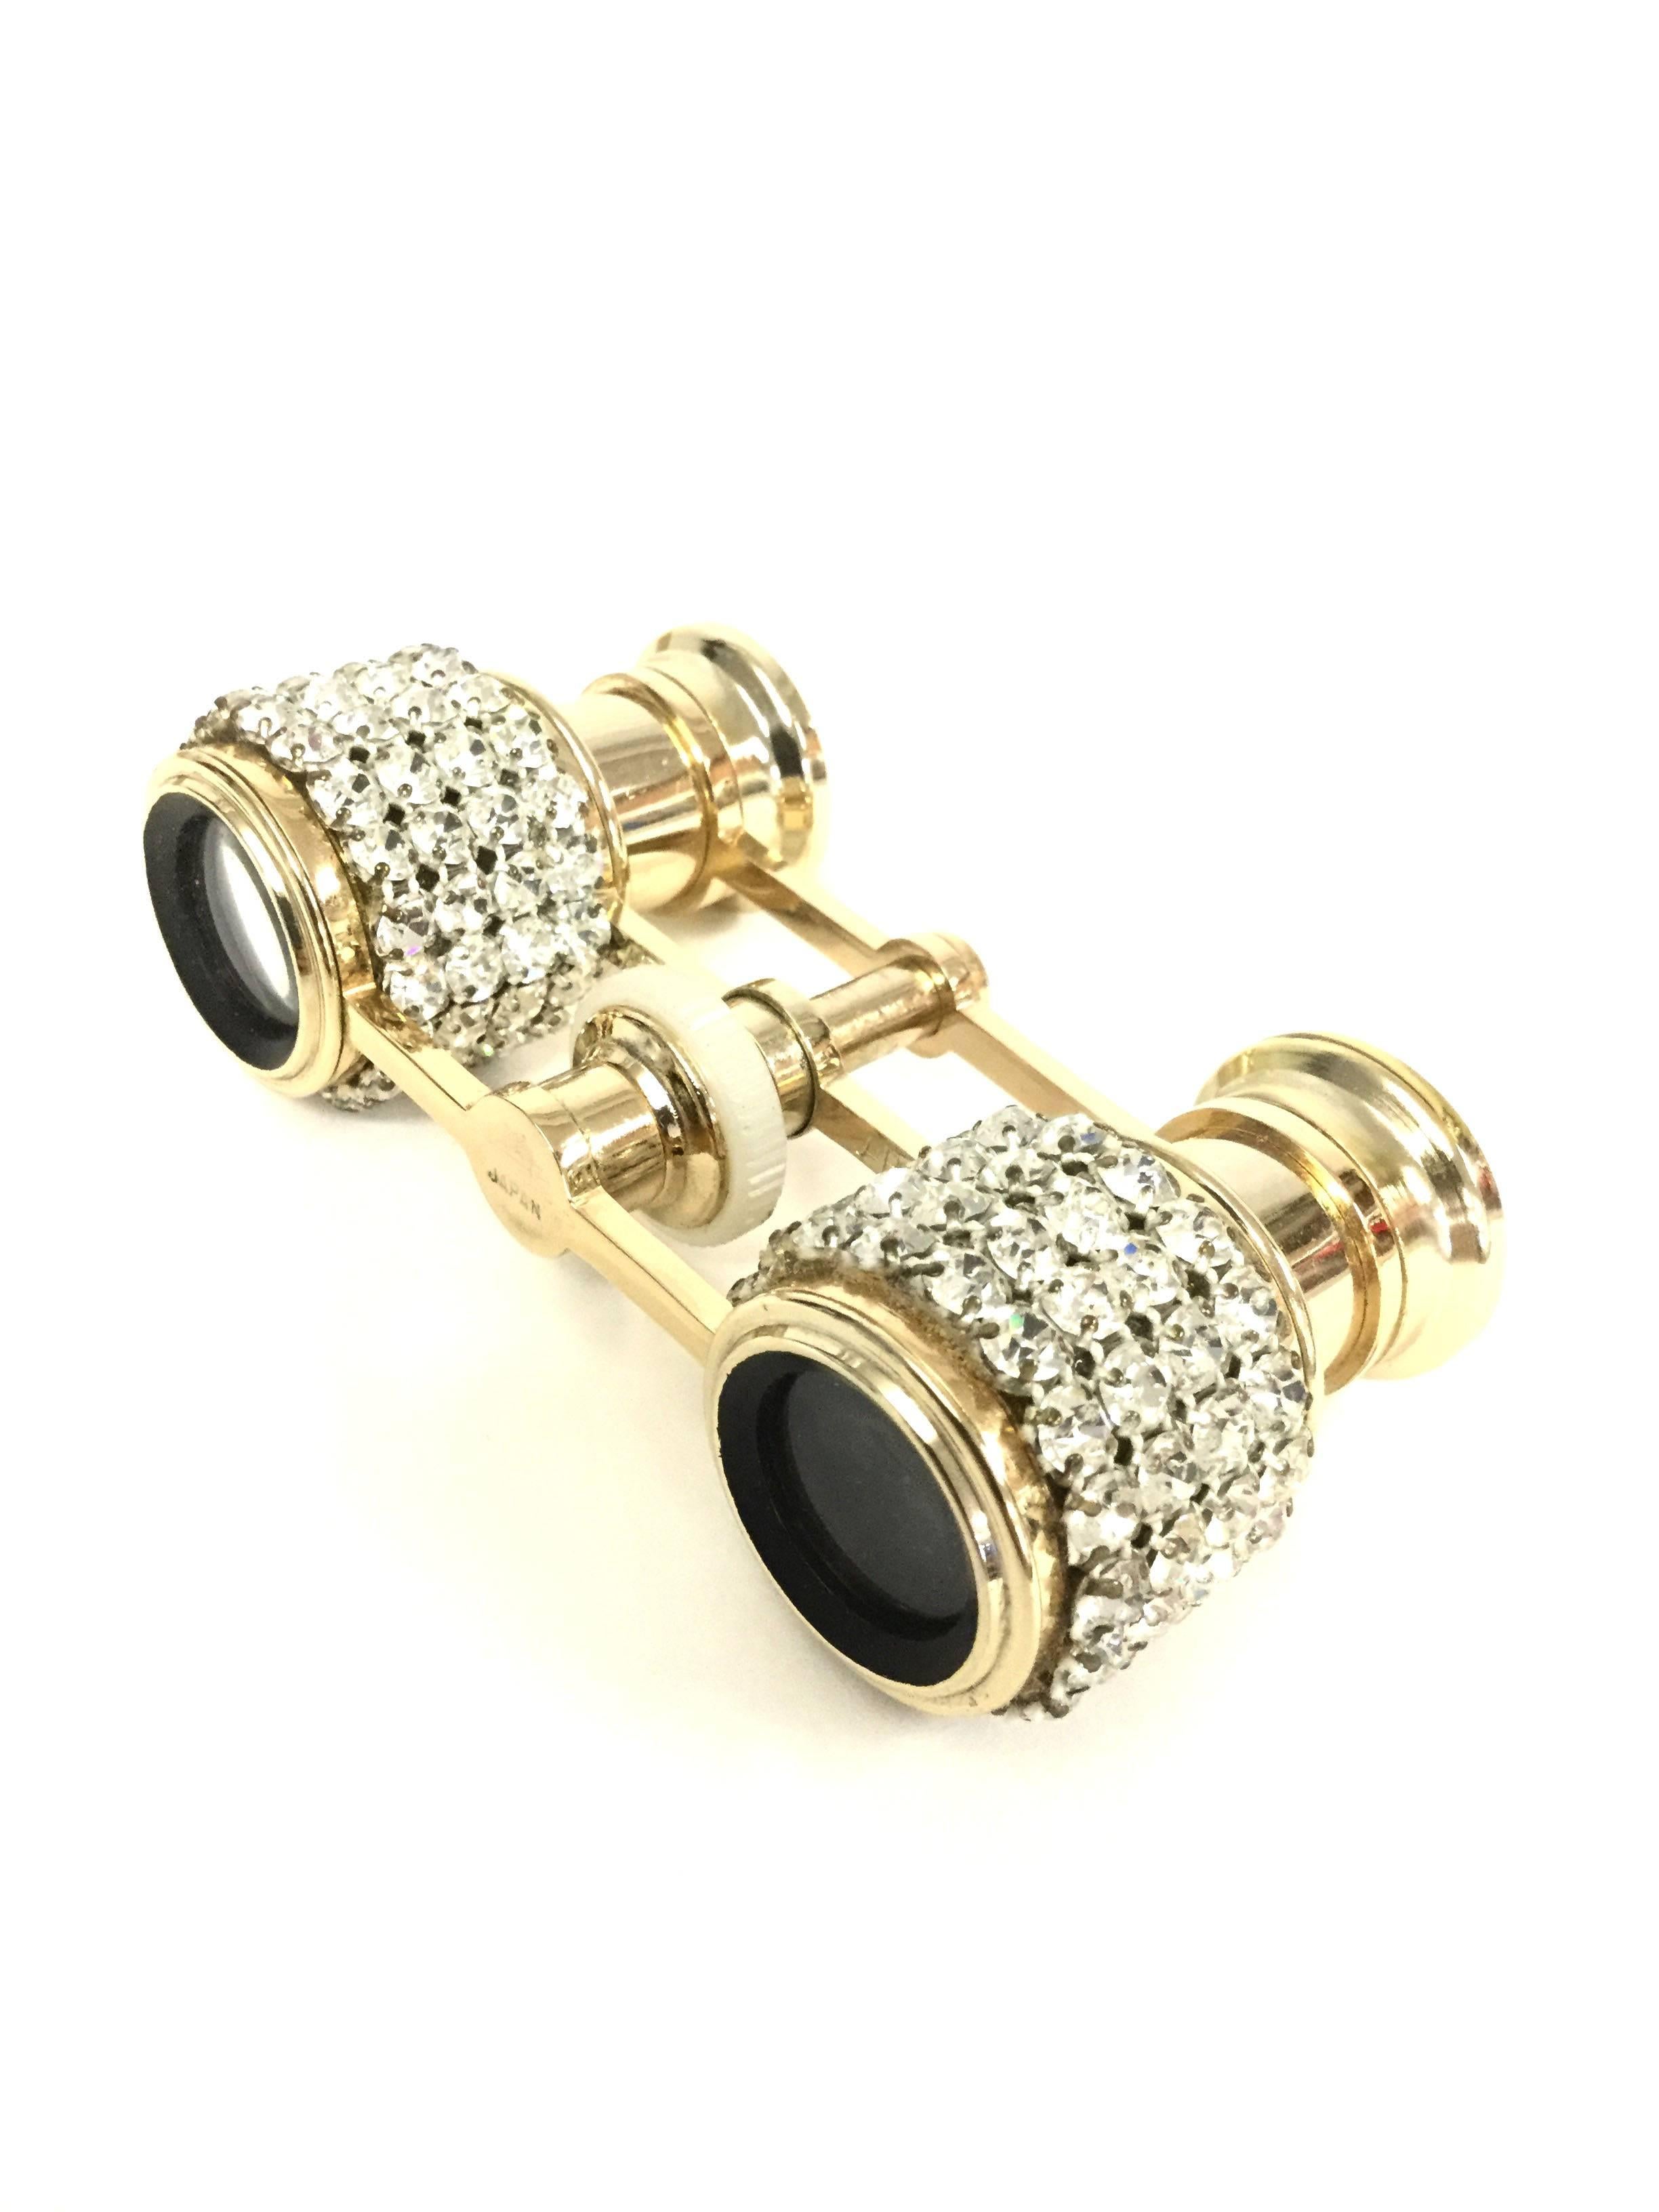 
These midcentury opera glasses by Mignon Japan are undeniably glamorous. The gold tone glasses feature four rows of rhinestones on each sight barrel with a thin, elegant bridge suspended between them. Included is the original soft, padded,